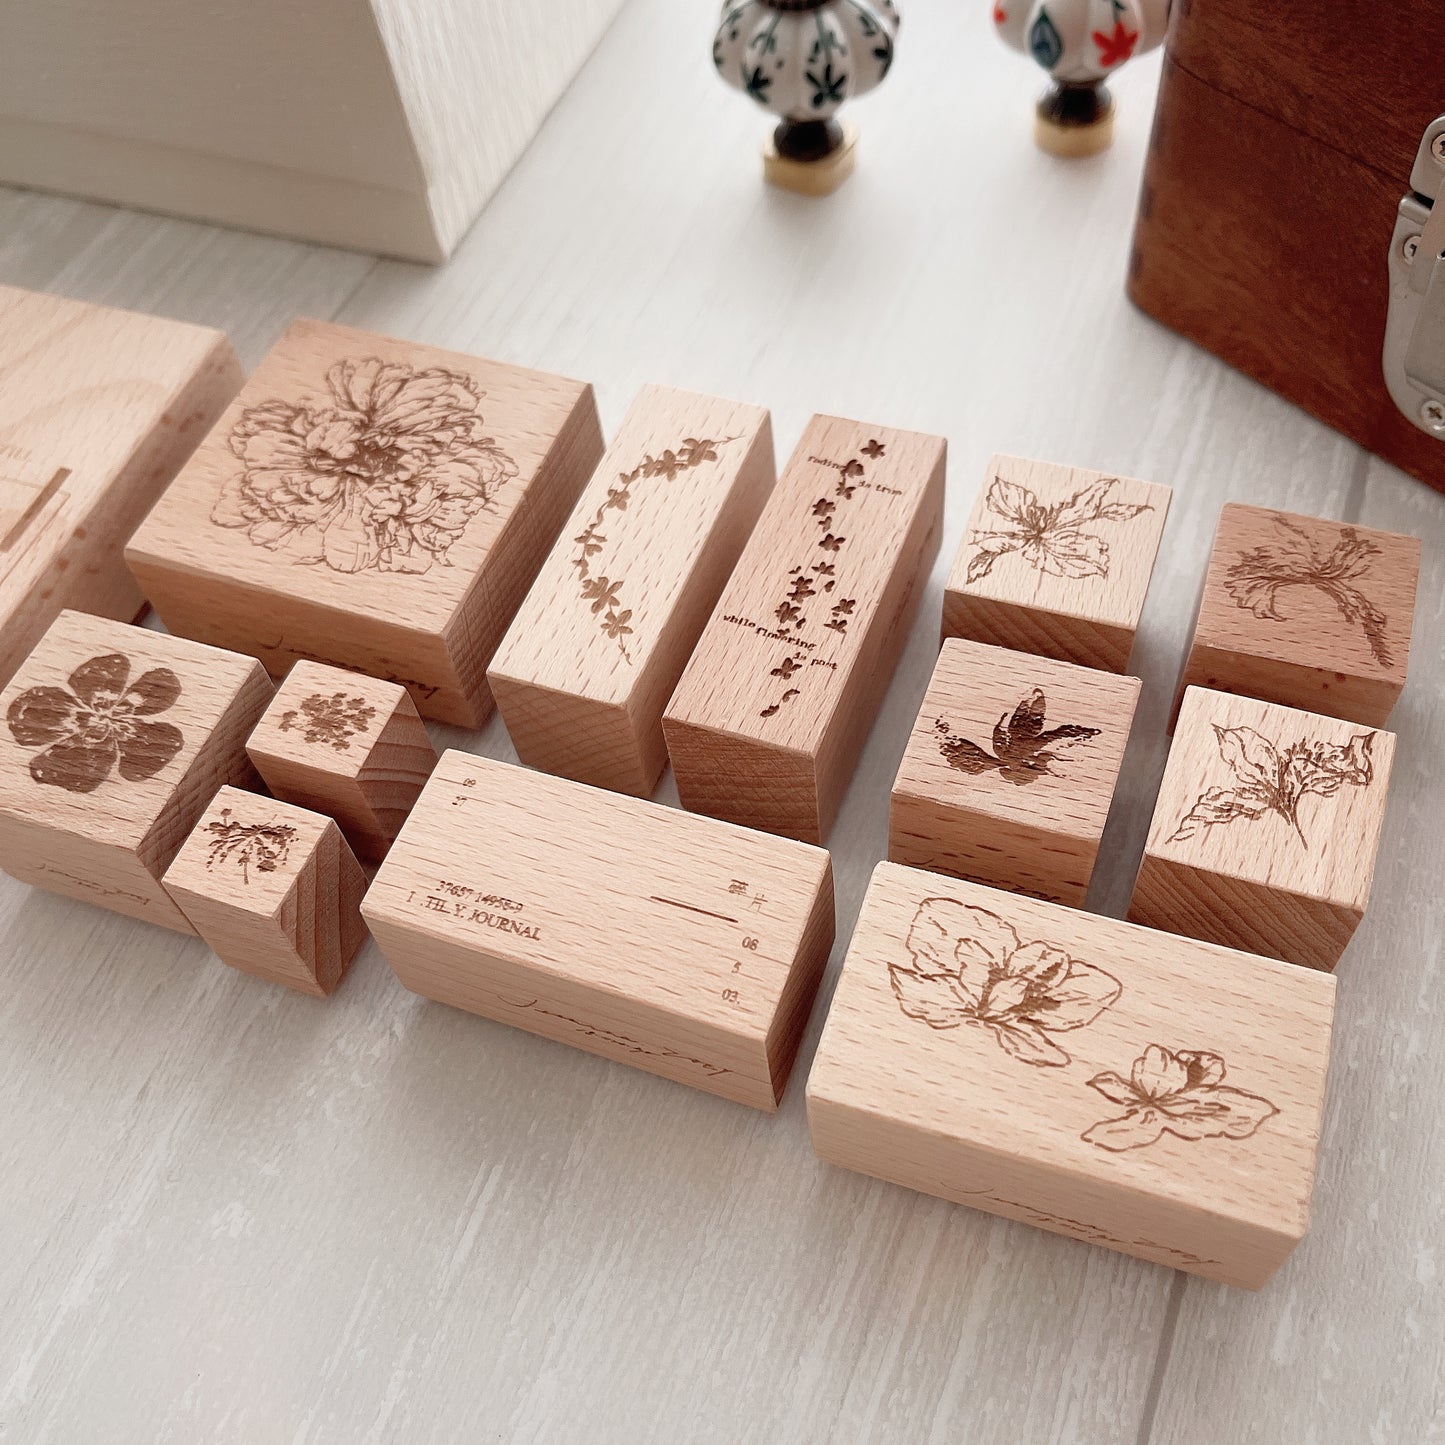 Jeenzaa Zoey Falling Flowers & Shadows Rubber Stamps // No. 02